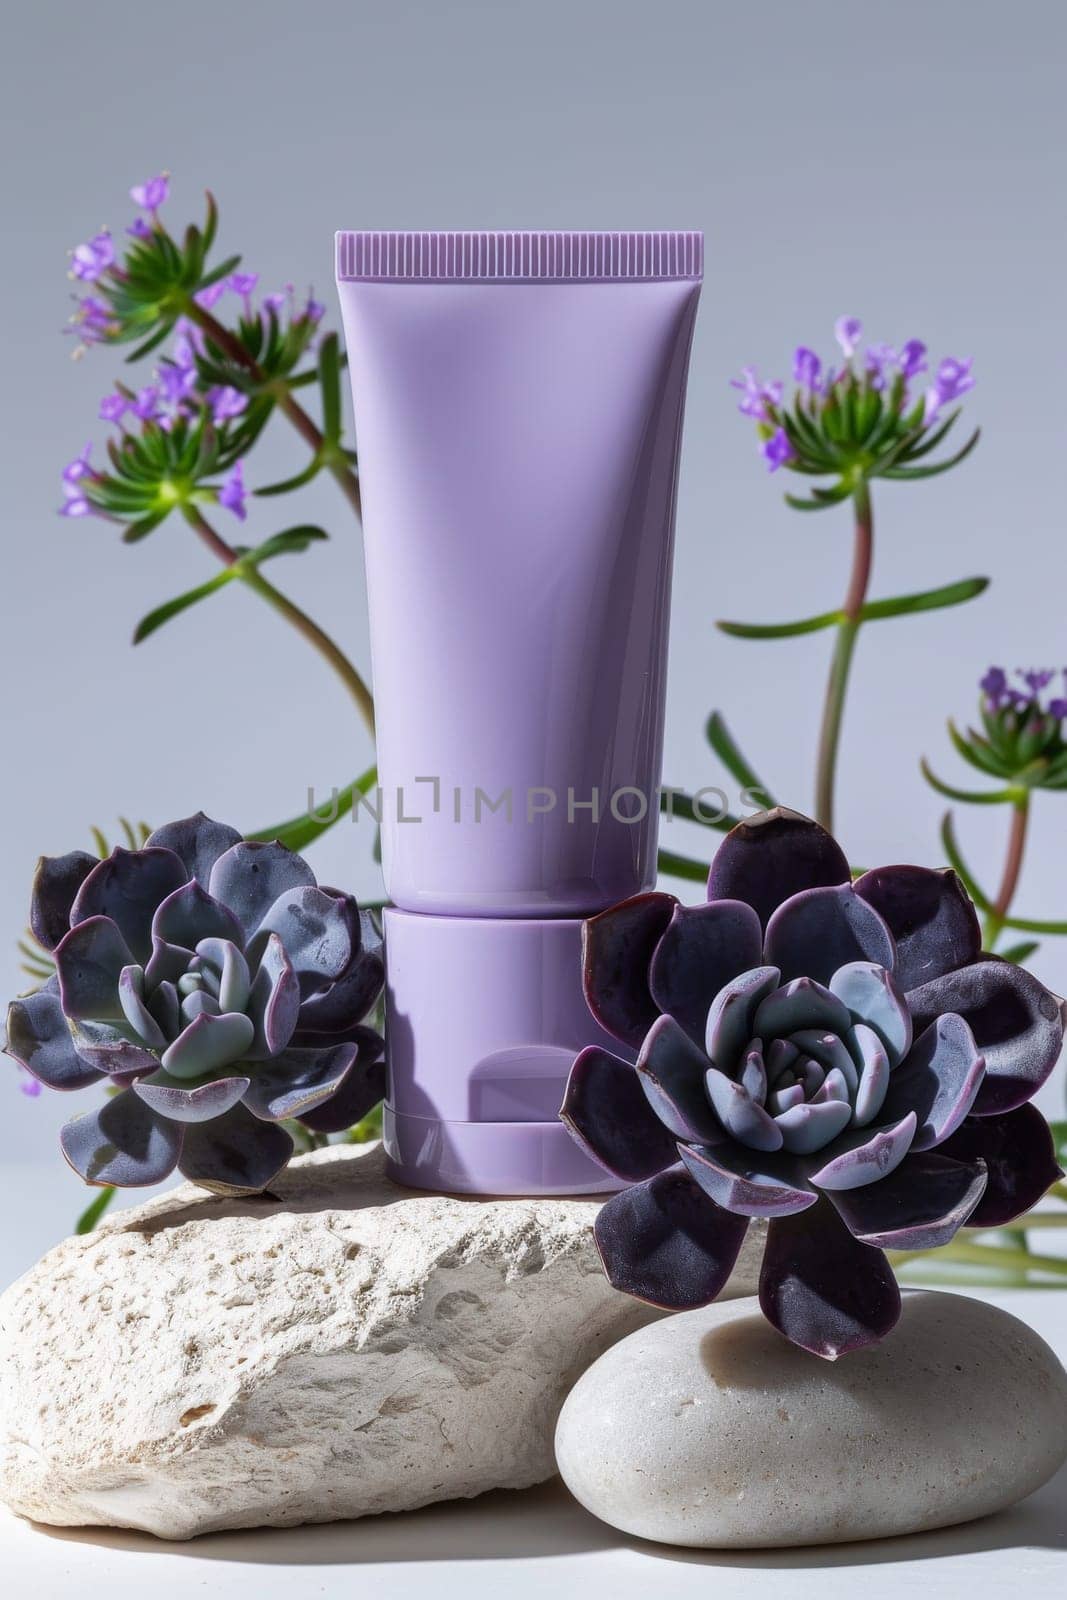 A small purple tube of lotion sits on a rock next to purple flowers by itchaznong